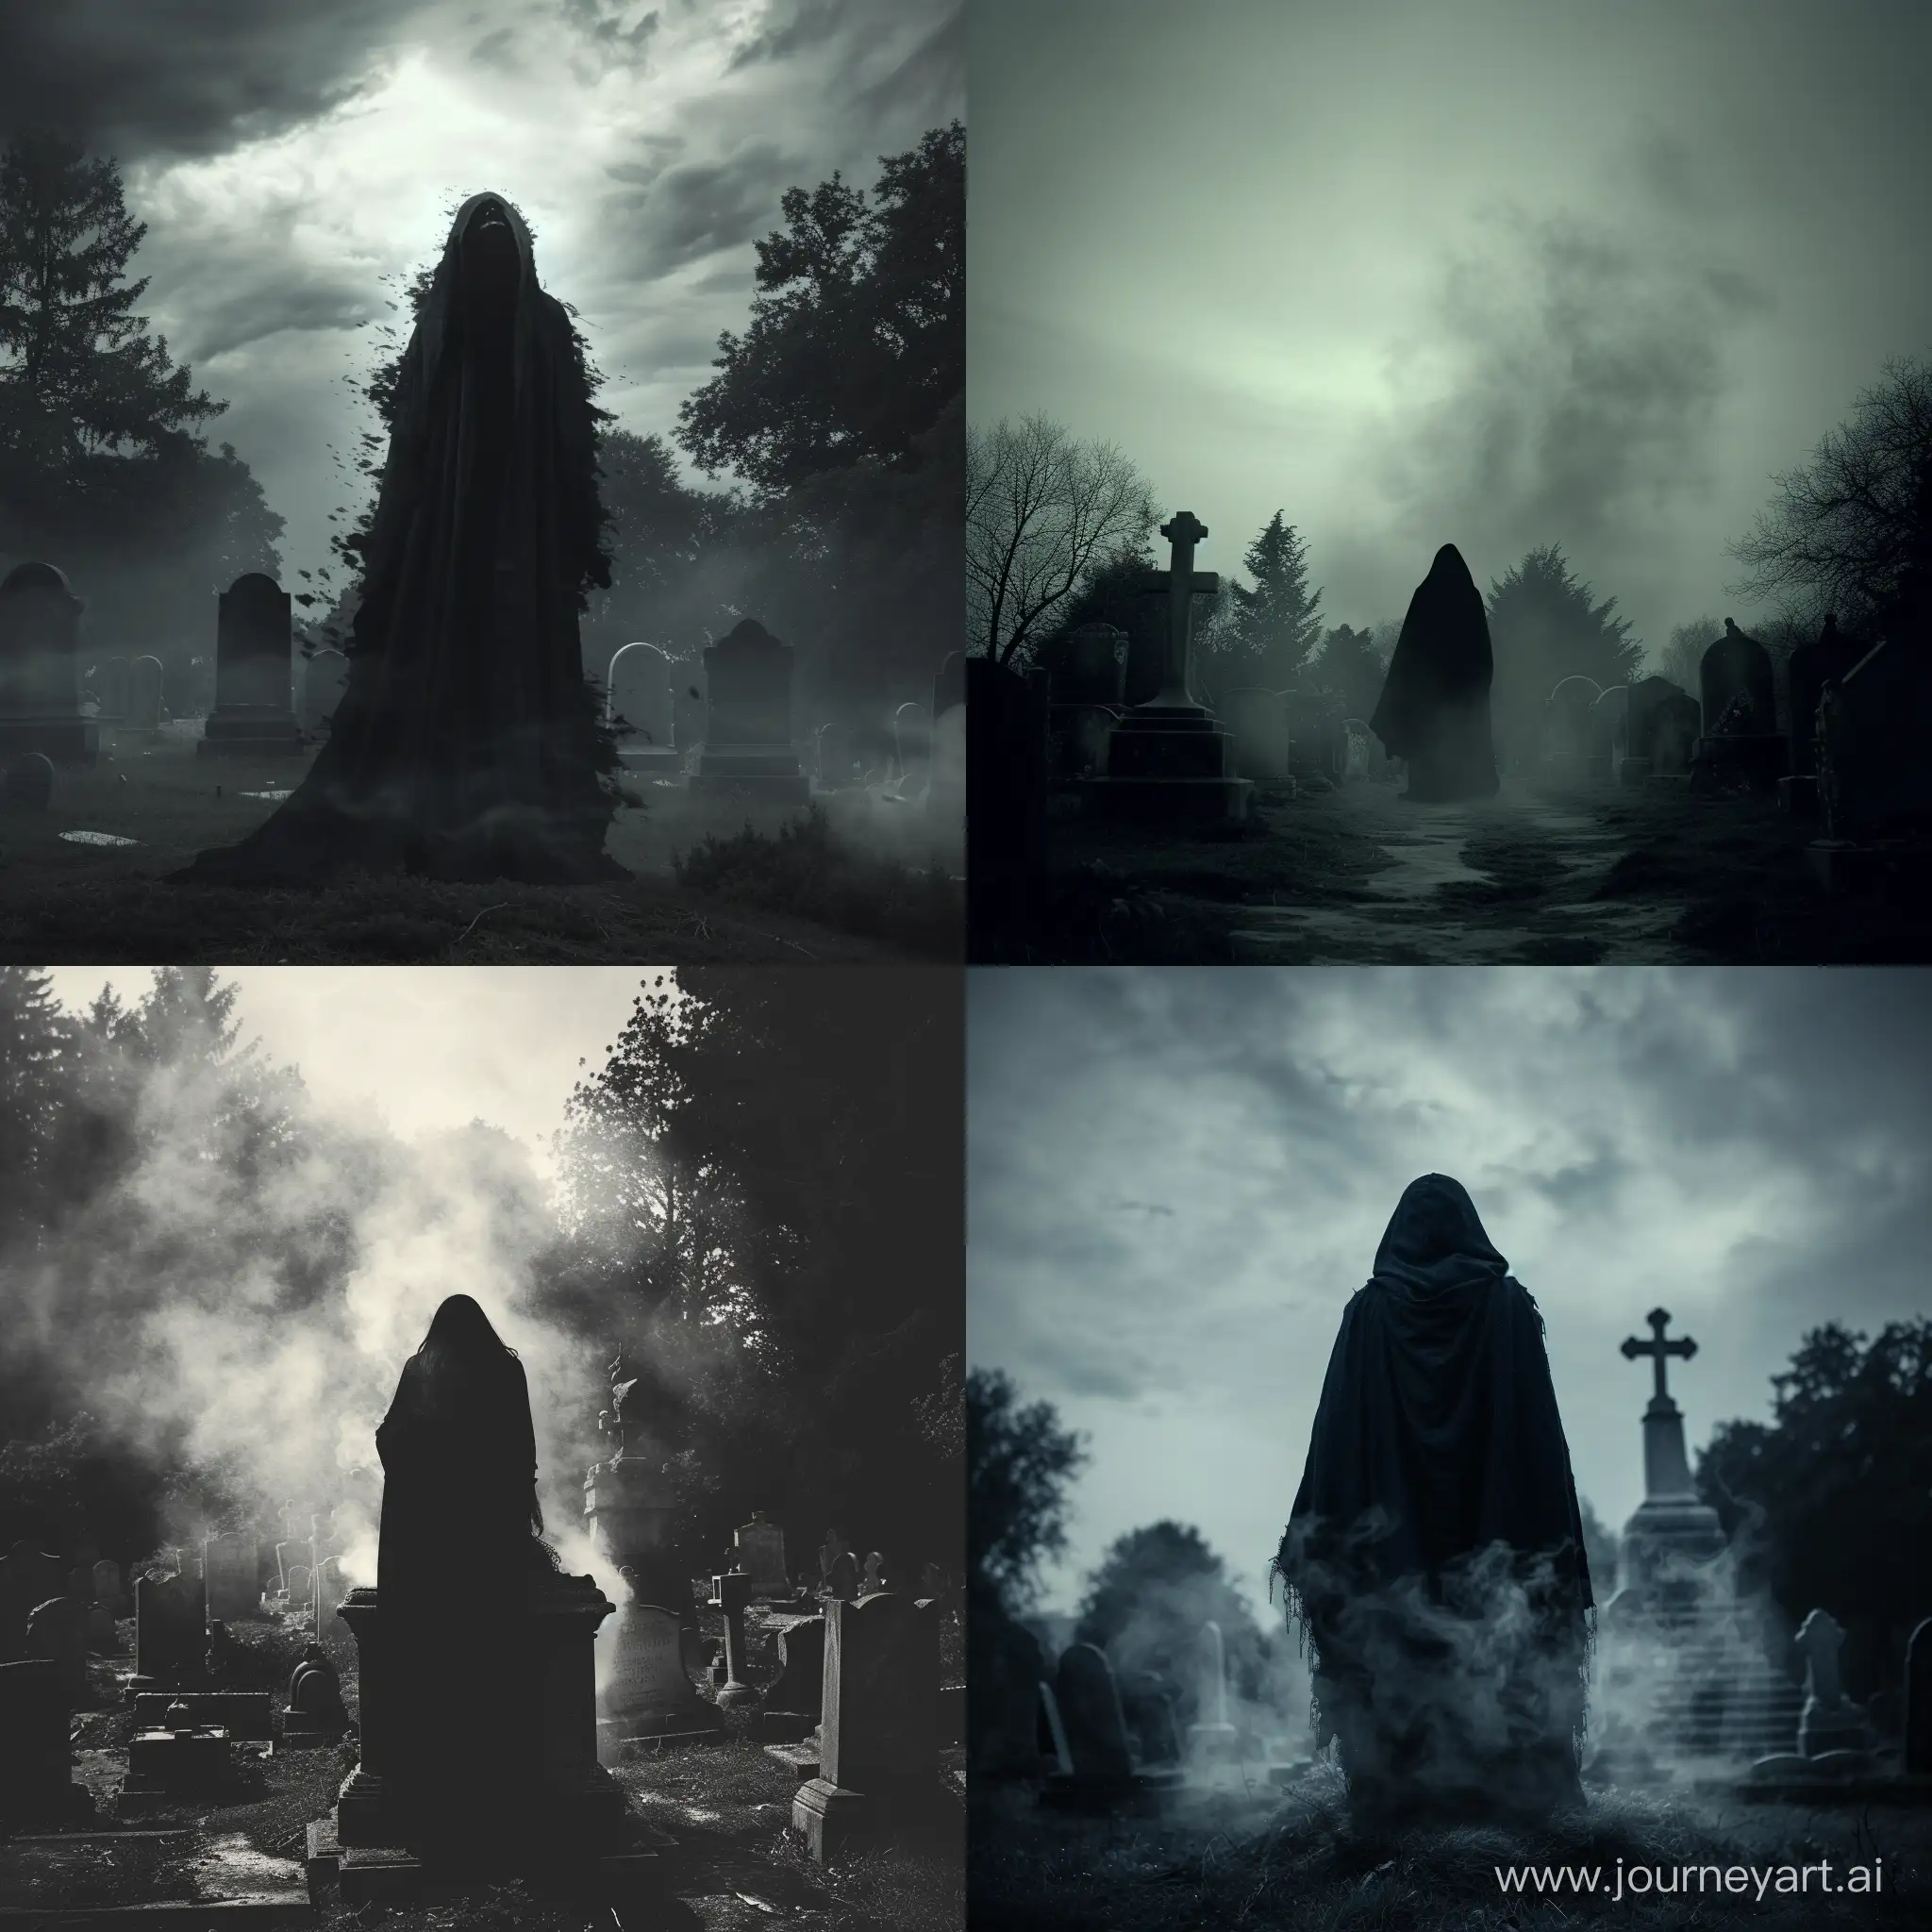 Mysterious-Ritual-in-a-Gloomy-Graveyard